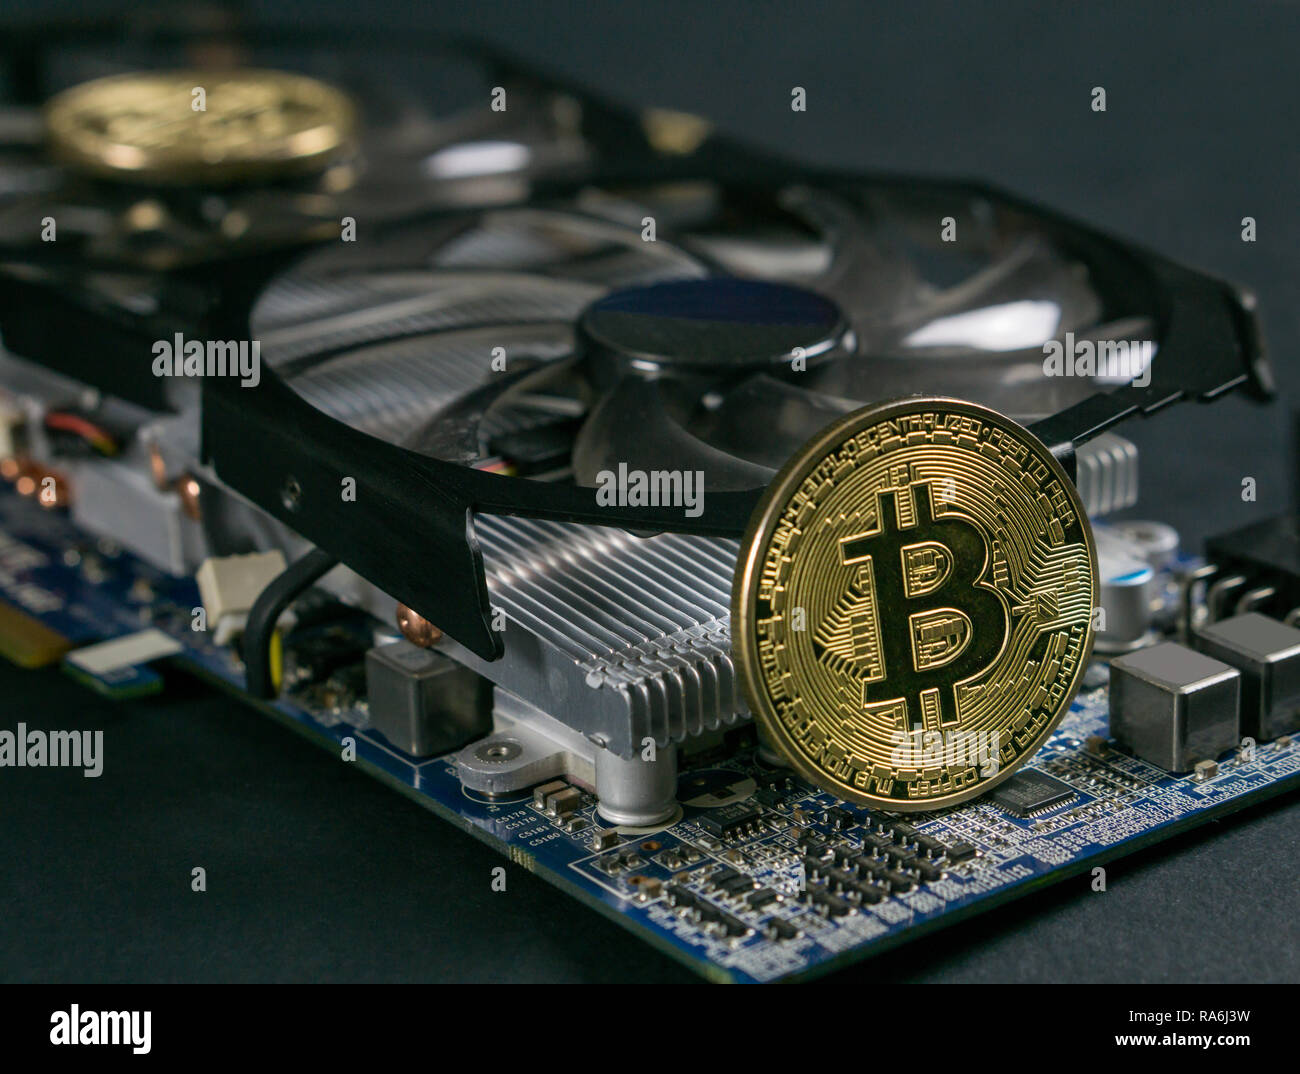 cryptocurrency and graphics cards